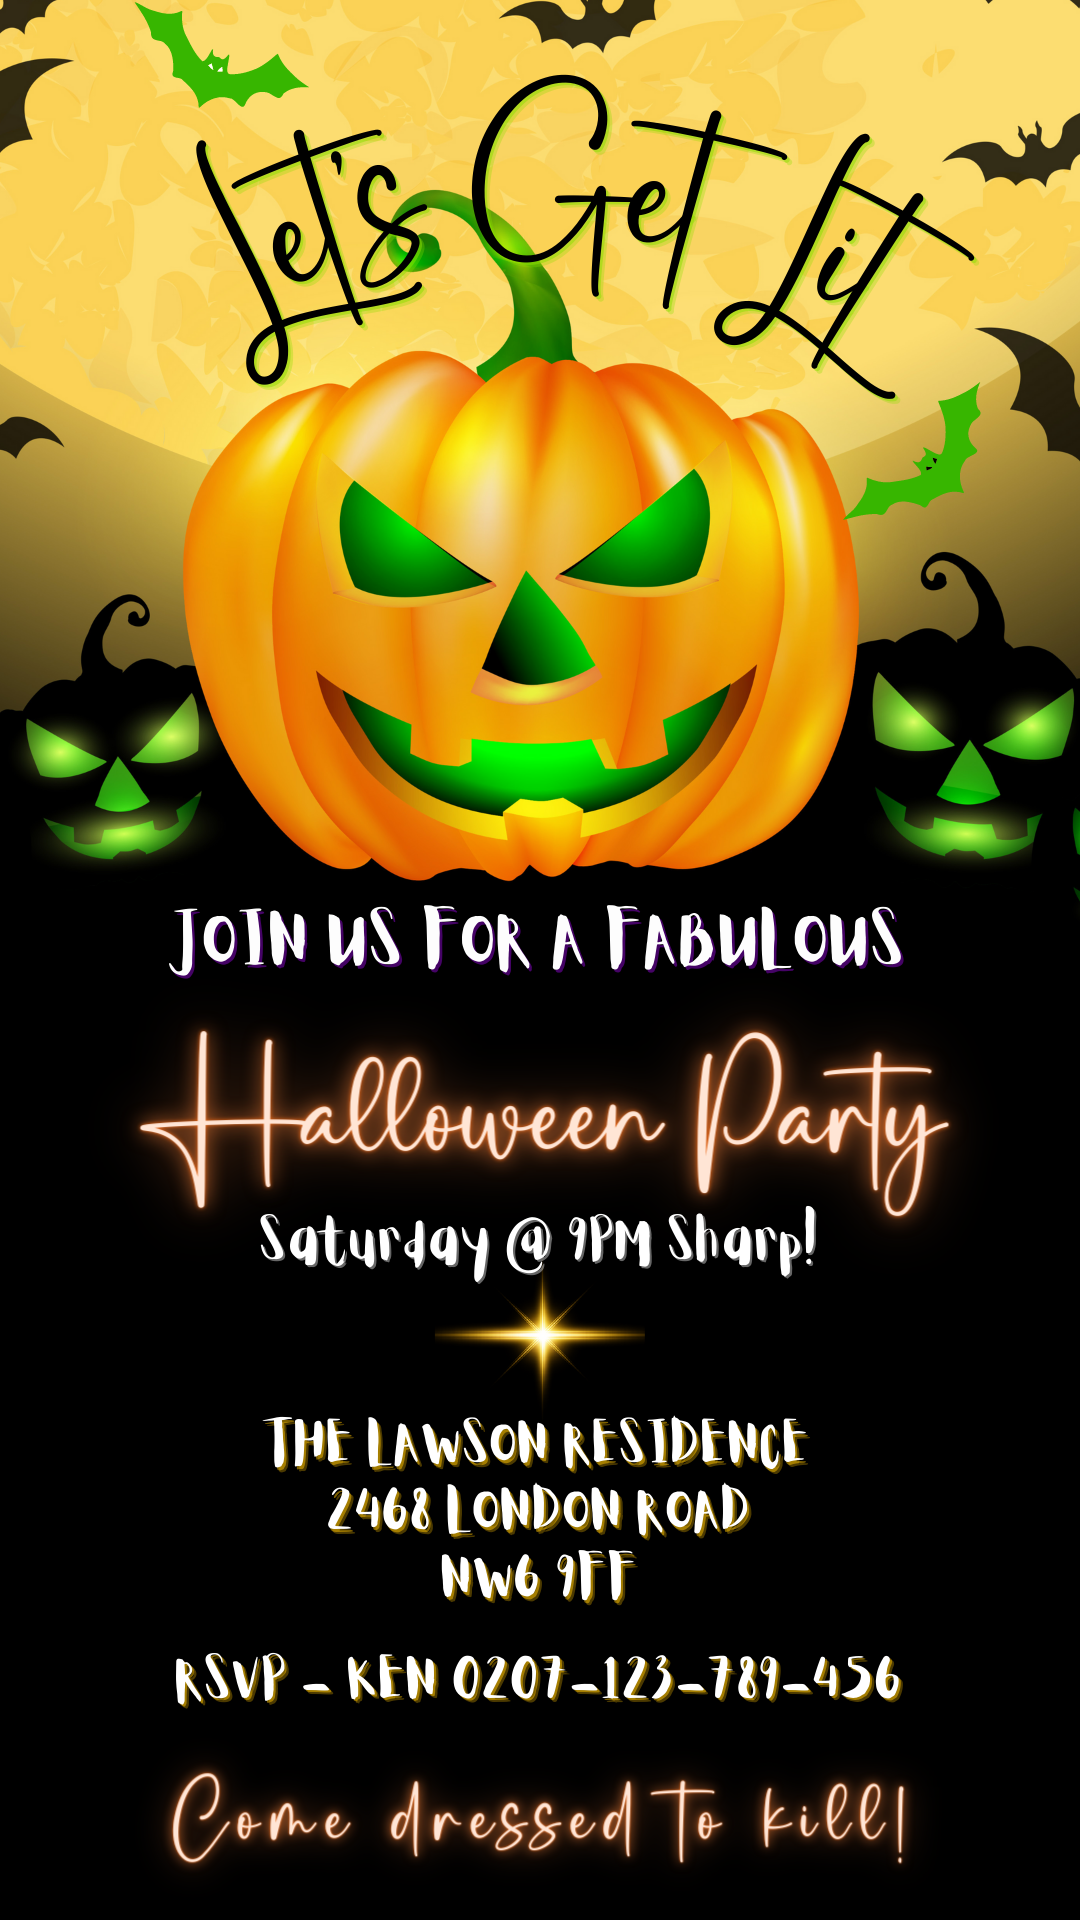 Halloween Evite featuring a green-eyed pumpkin with customizable text, available as a digital invitation template for personalization via Canva.